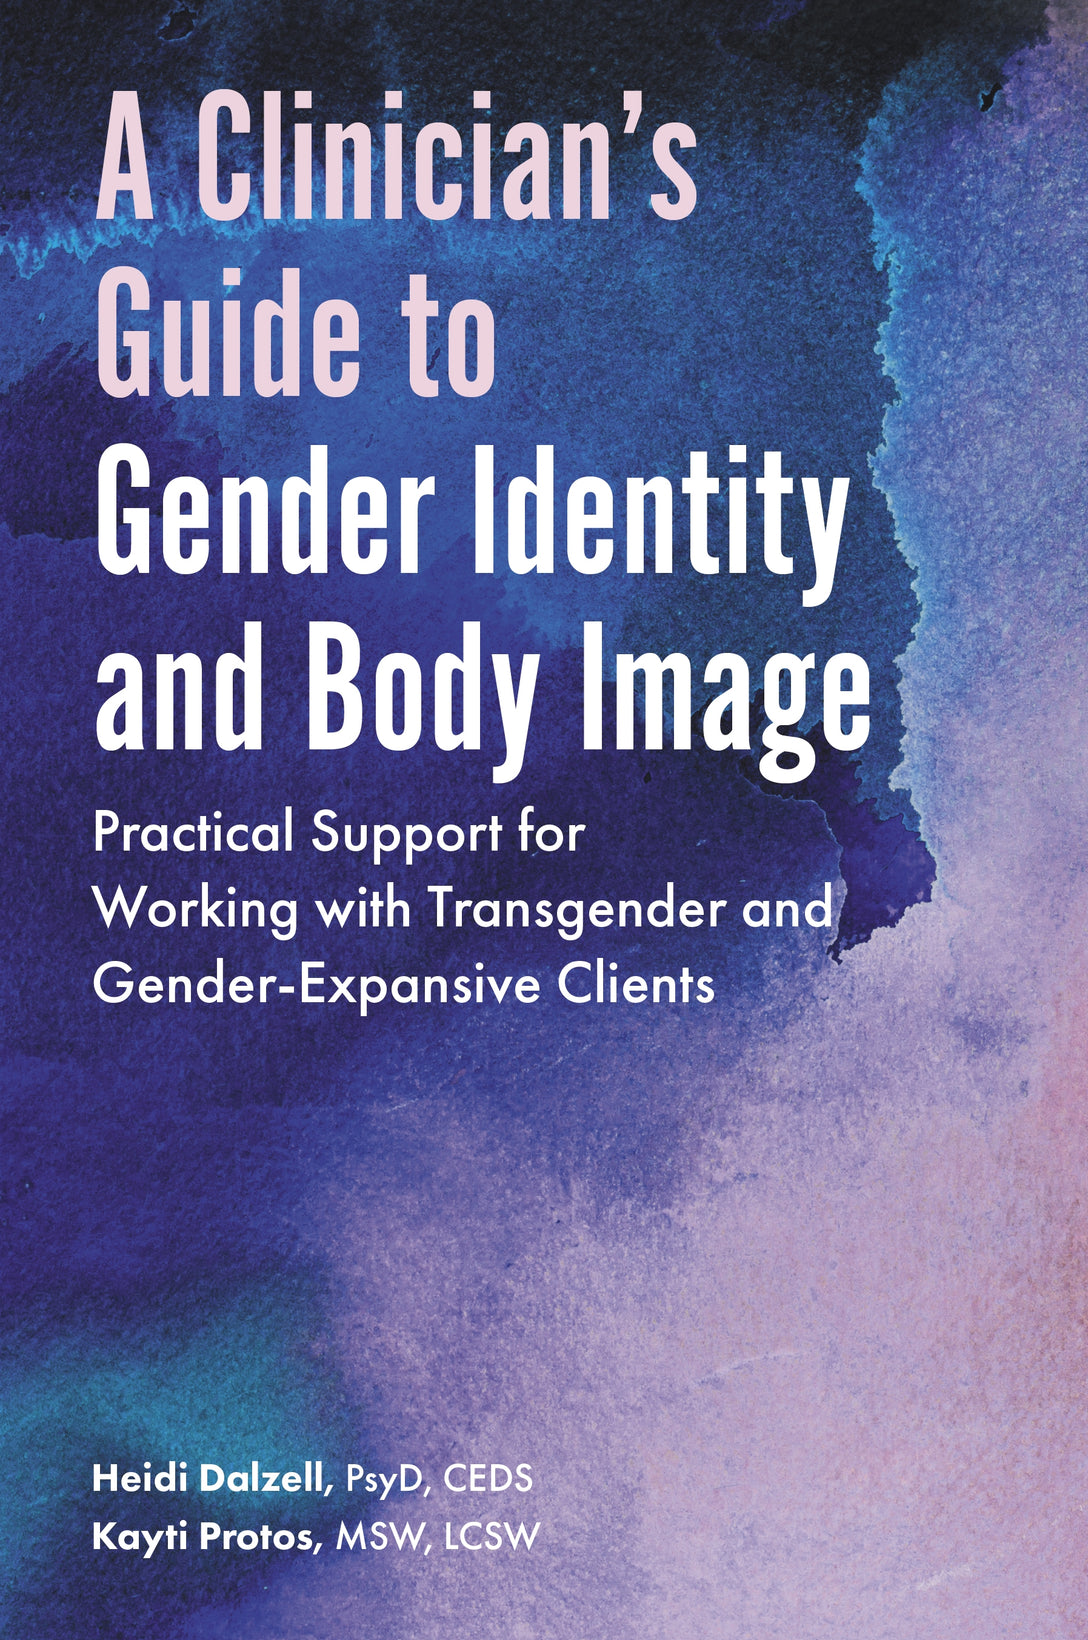 A Clinician's Guide to Gender Identity and Body Image by Heidi Dalzell, Kayti Protos